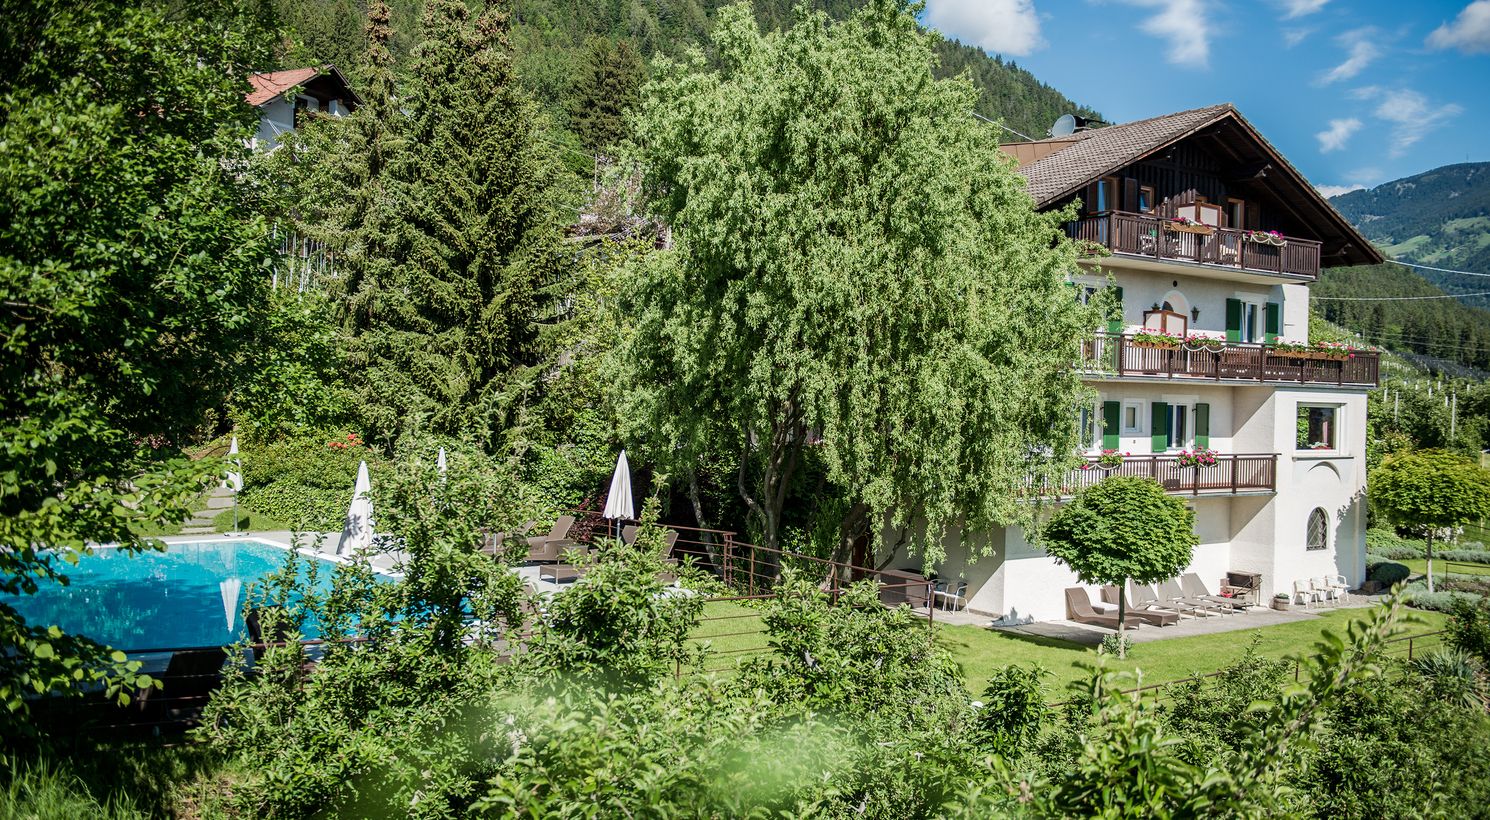 Accommodation Foiana with outdoor pool